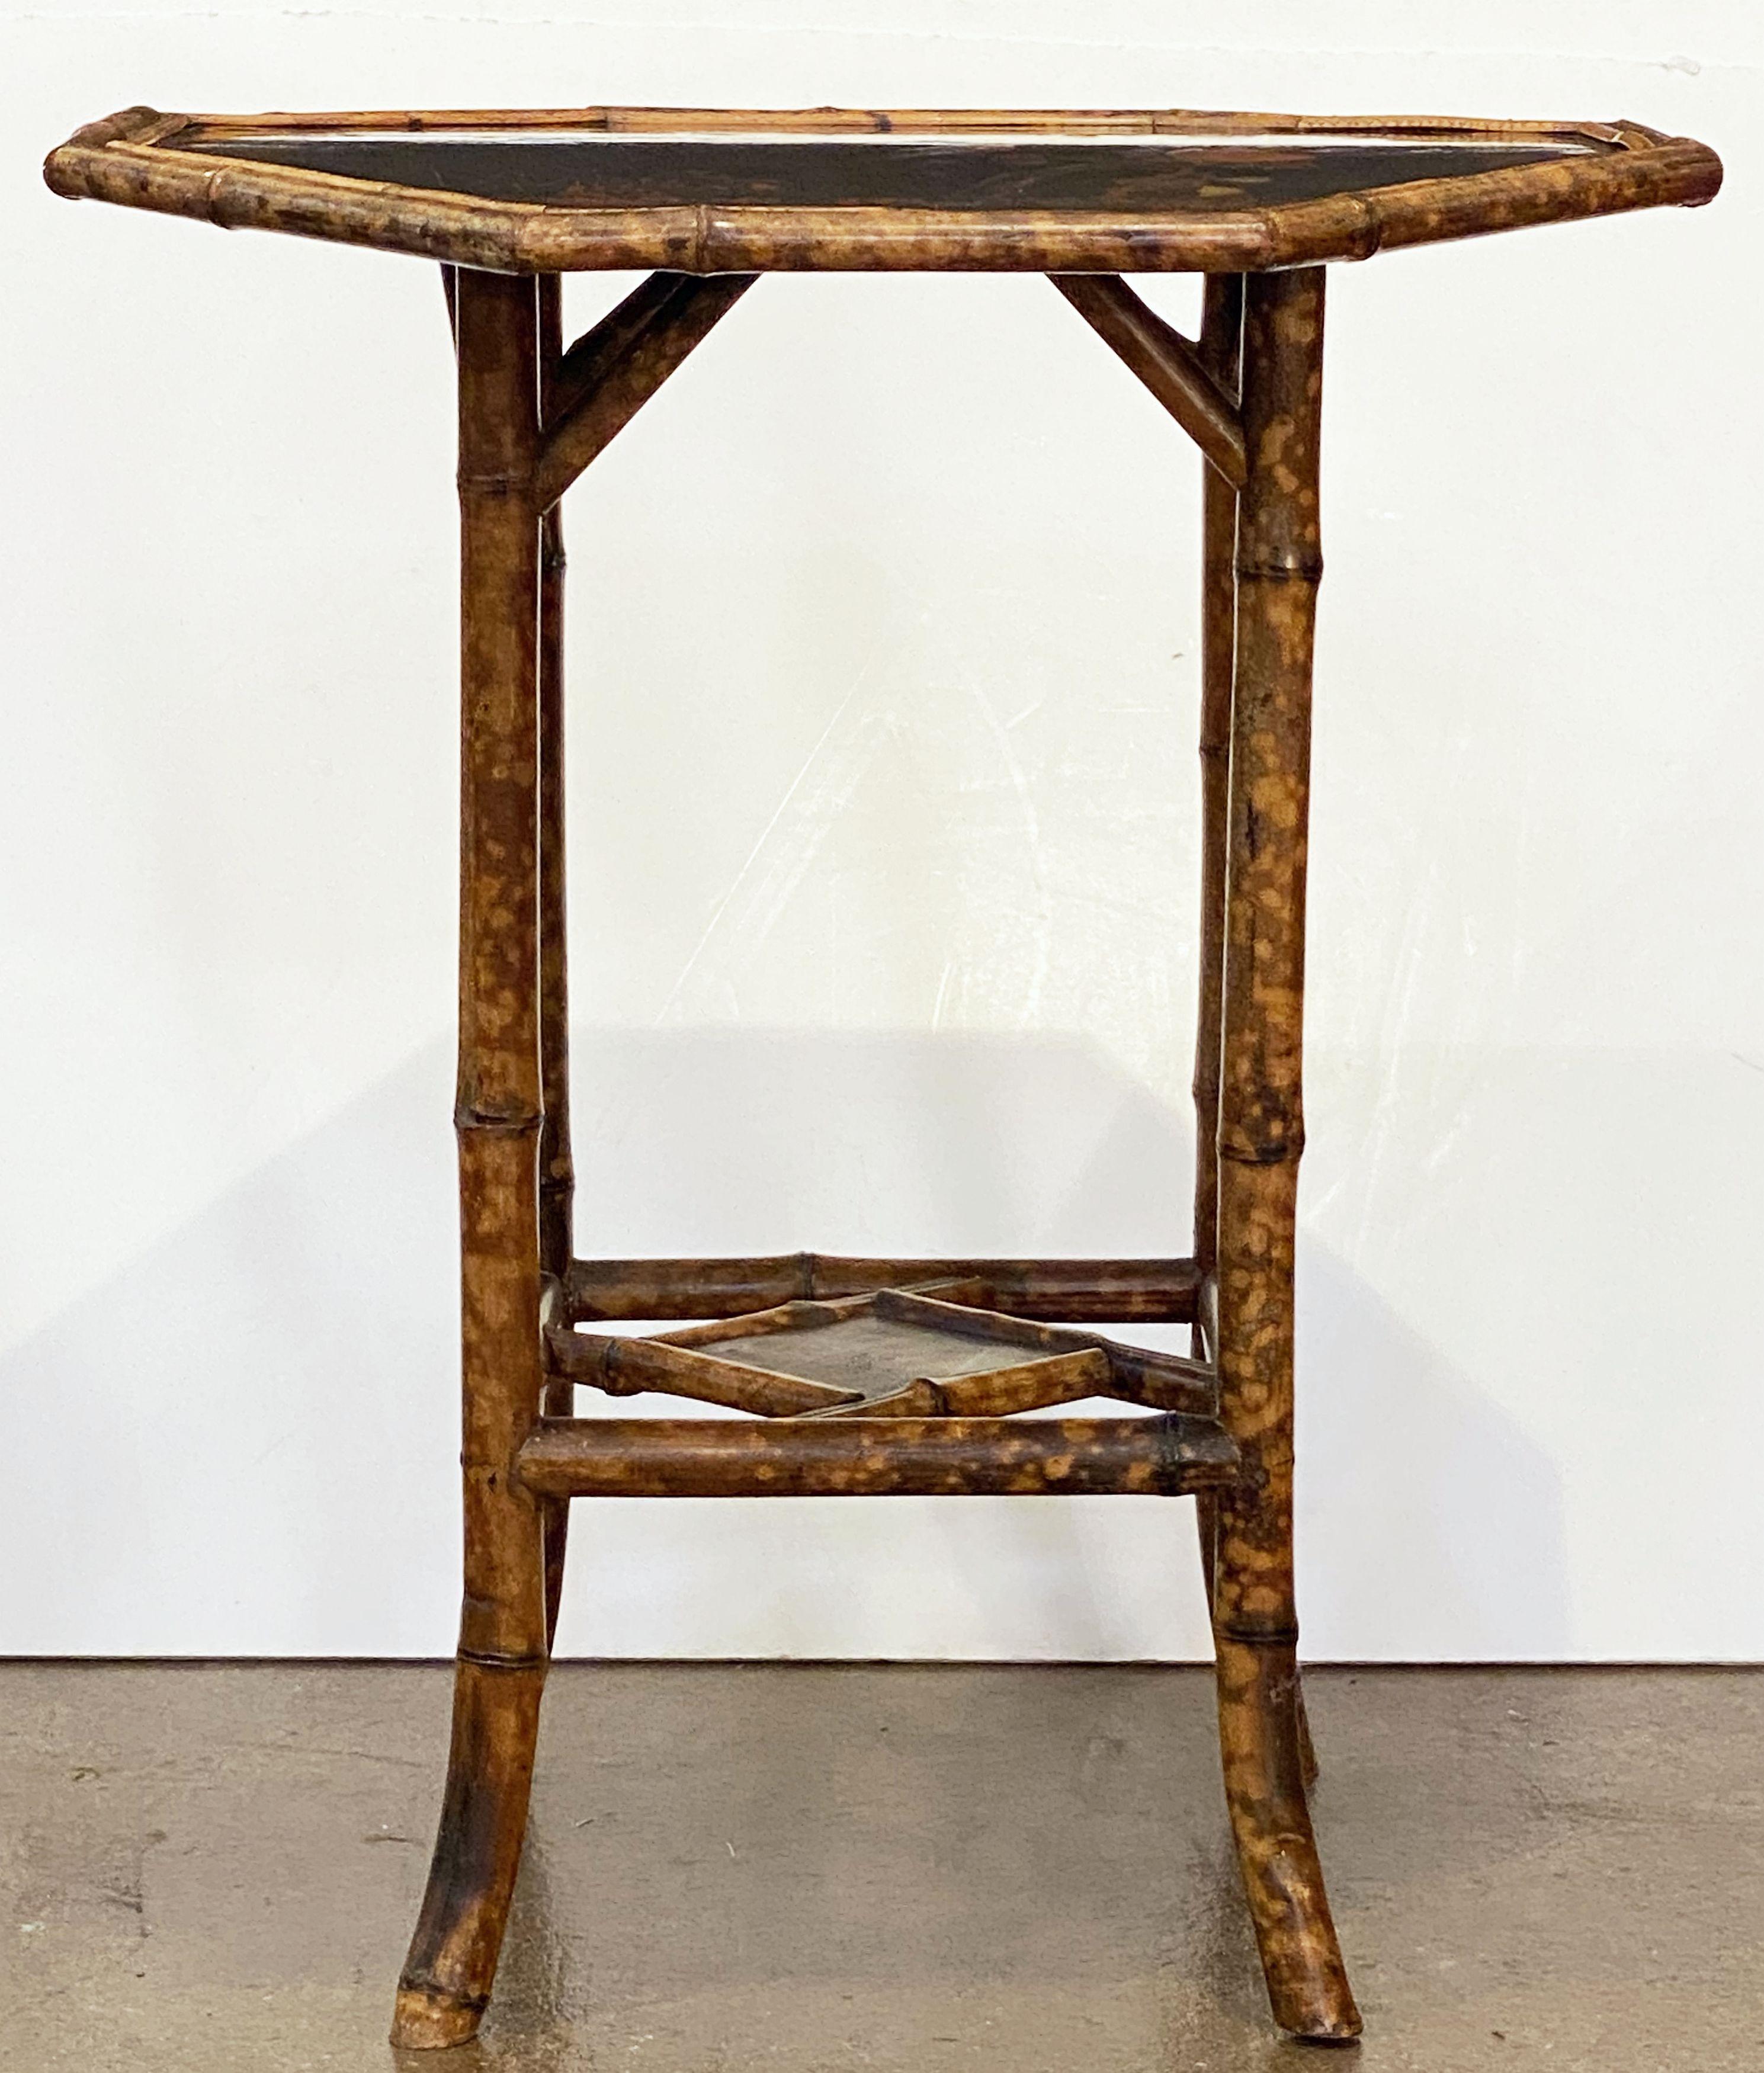 A fine English bamboo table (side or occasional), c.1870-1910, featuring an octagonal top with Japan lacquered chinoiserie design, over a stretcher base with diamond-shaped lacquered panel and ornamental fretwork running diagonally at each corner.